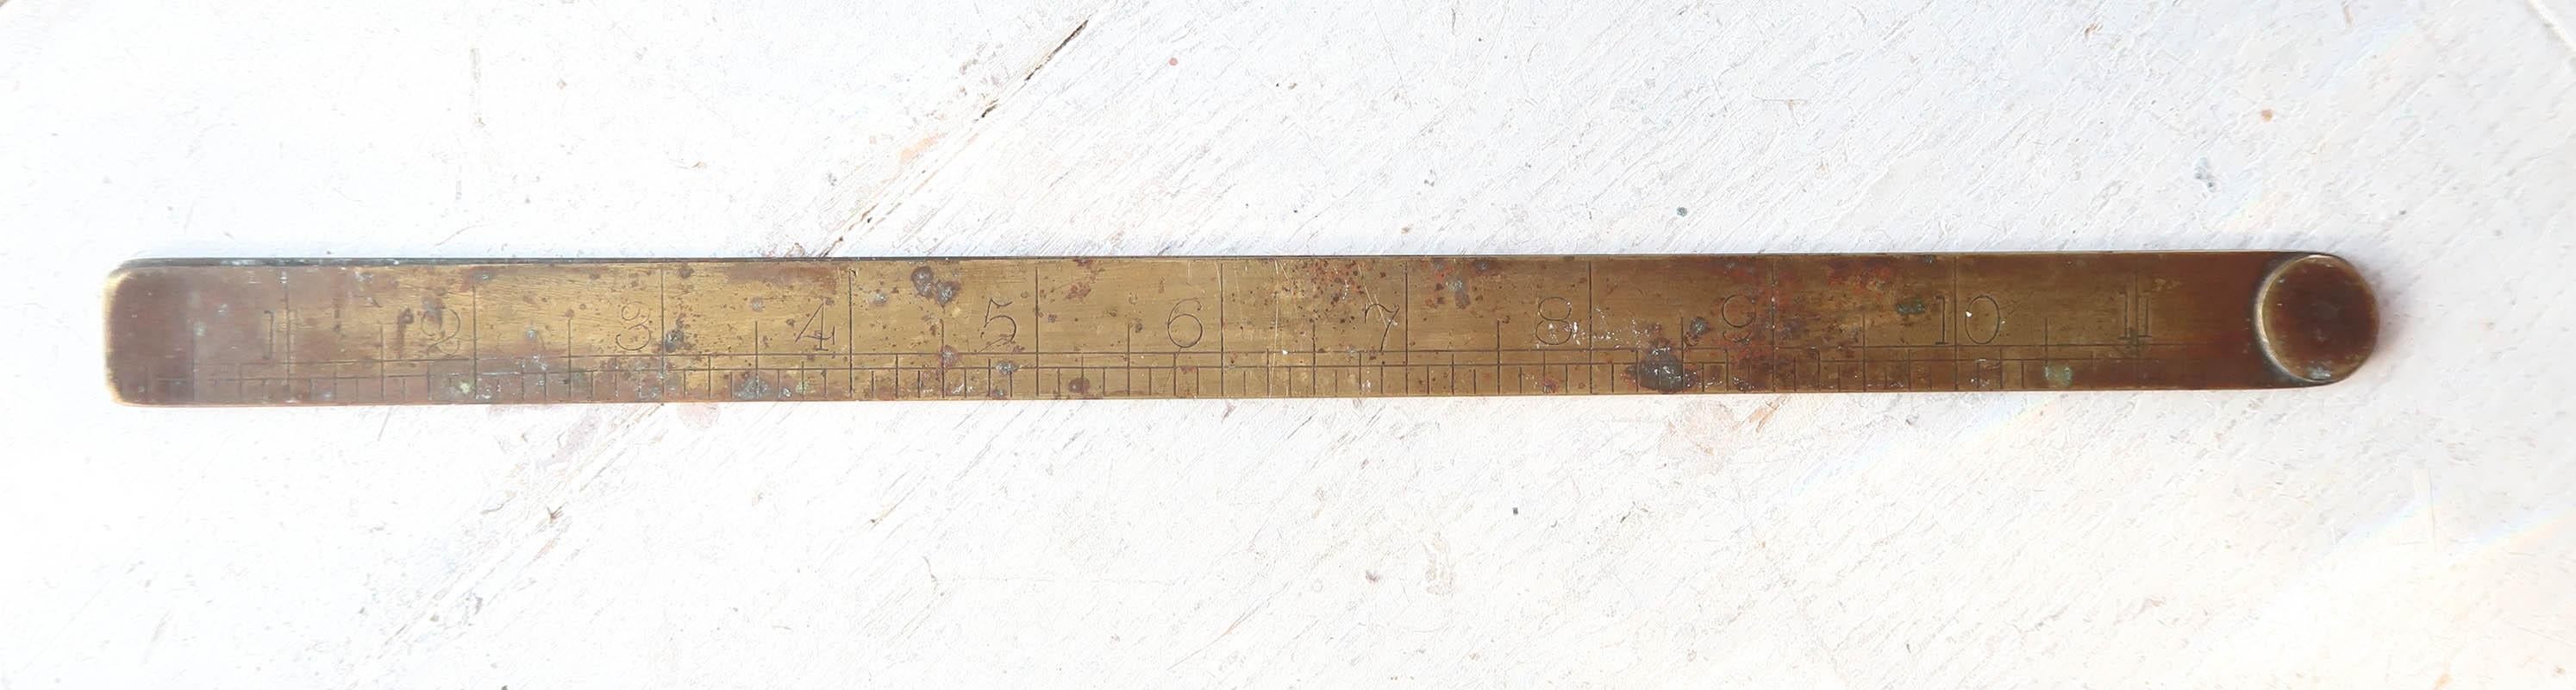 Engraved Antique Brass Folding Ruler. English, Late 19th Century For Sale